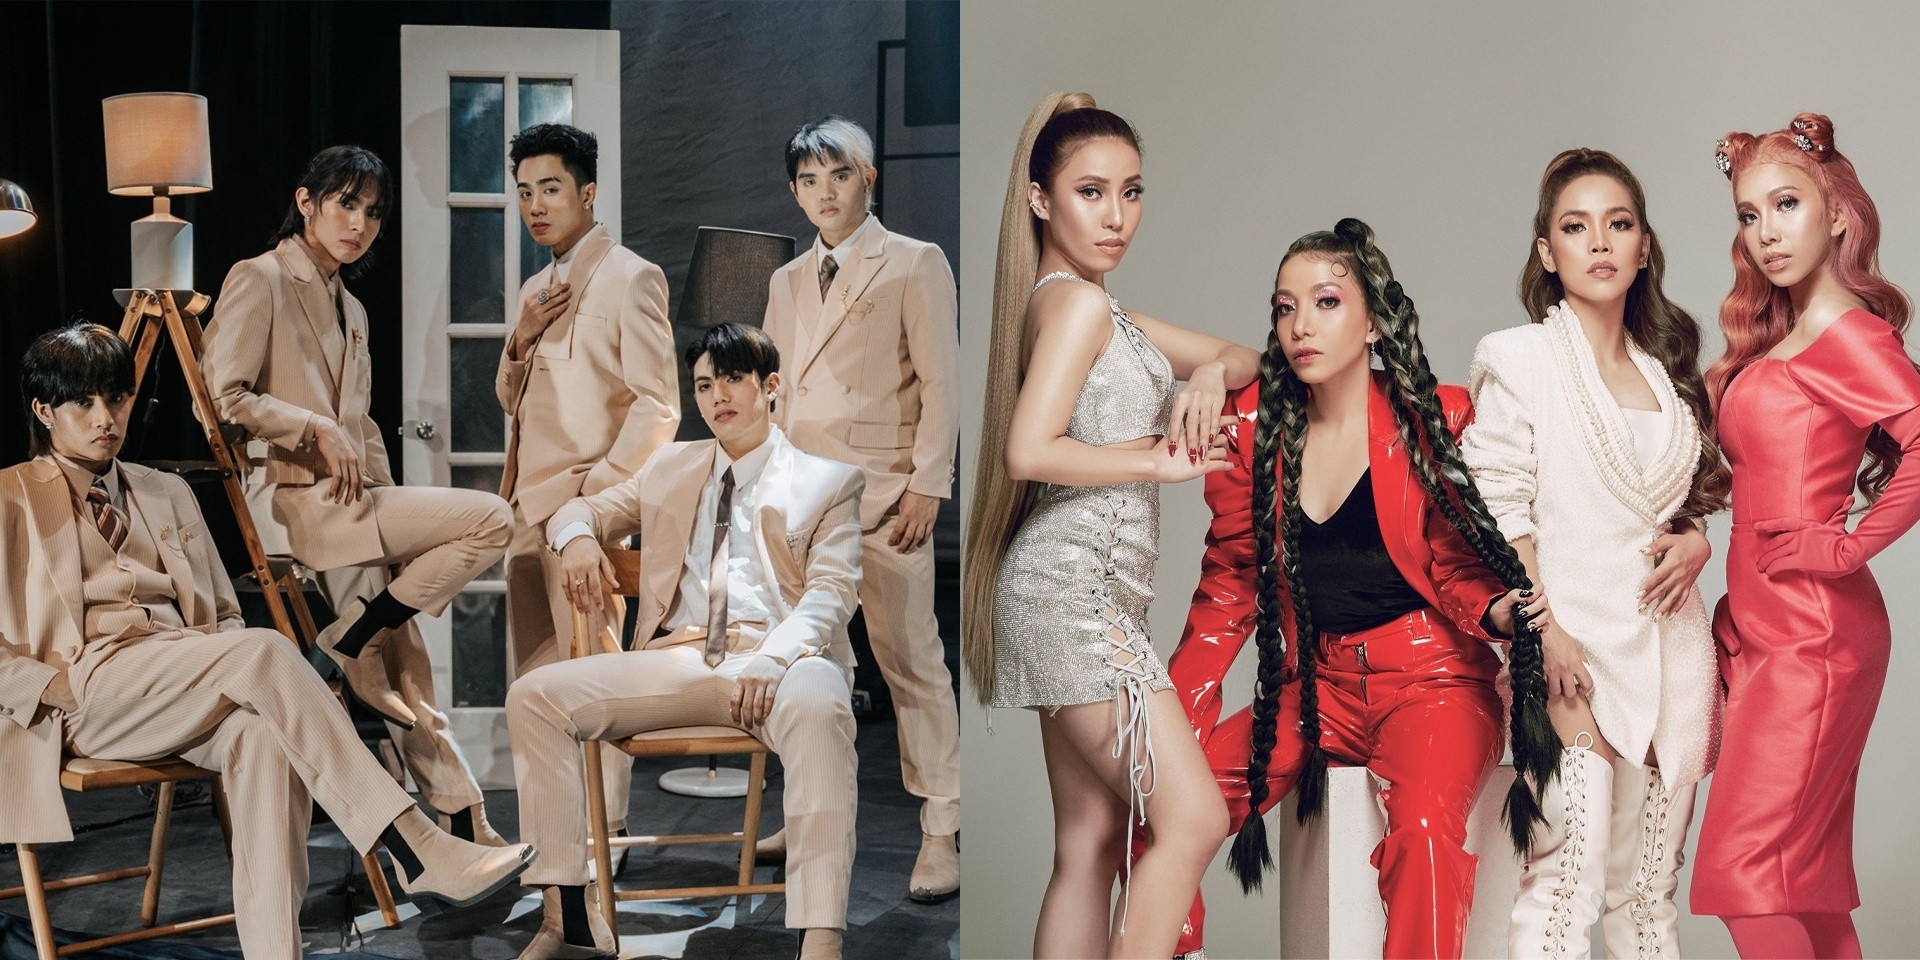 SB19 and 4th Impact to perform at FORTE: A Pop Orchestra Concert